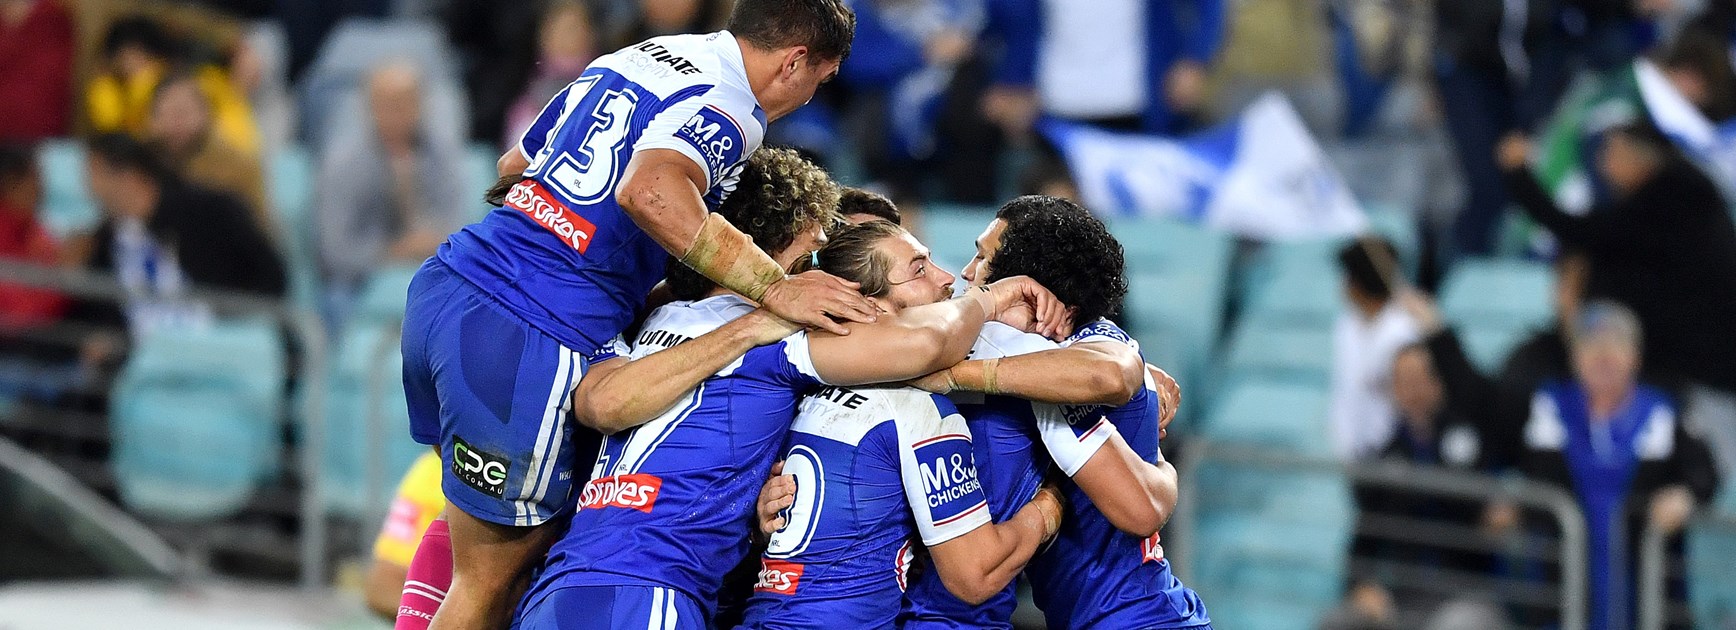 The Bulldogs celebrate a try against Souths.